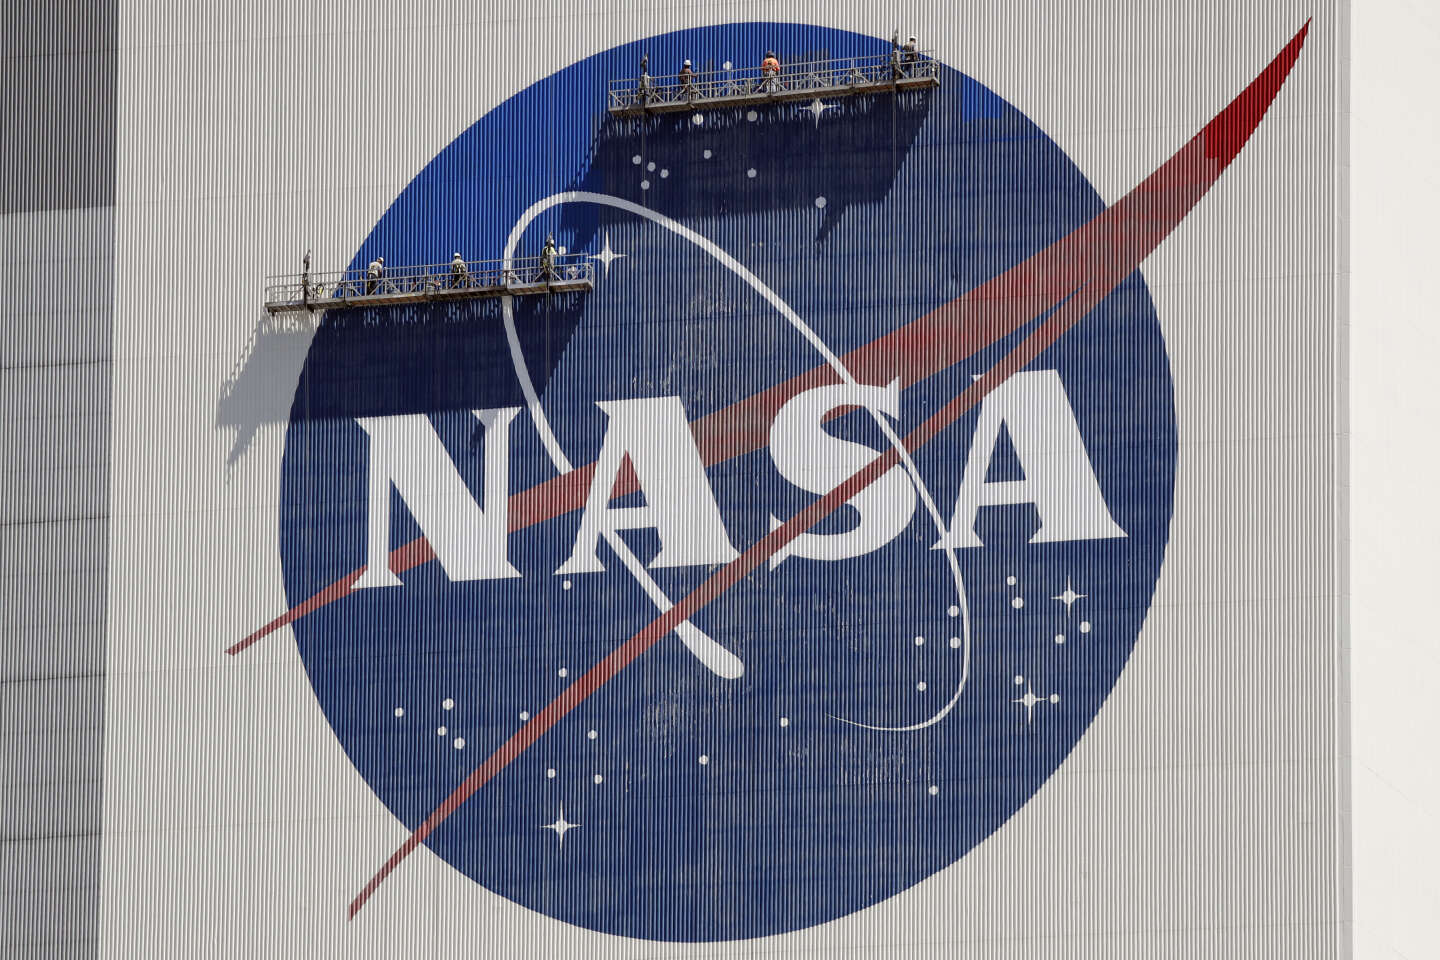 NASA joins the hunt for UFOs